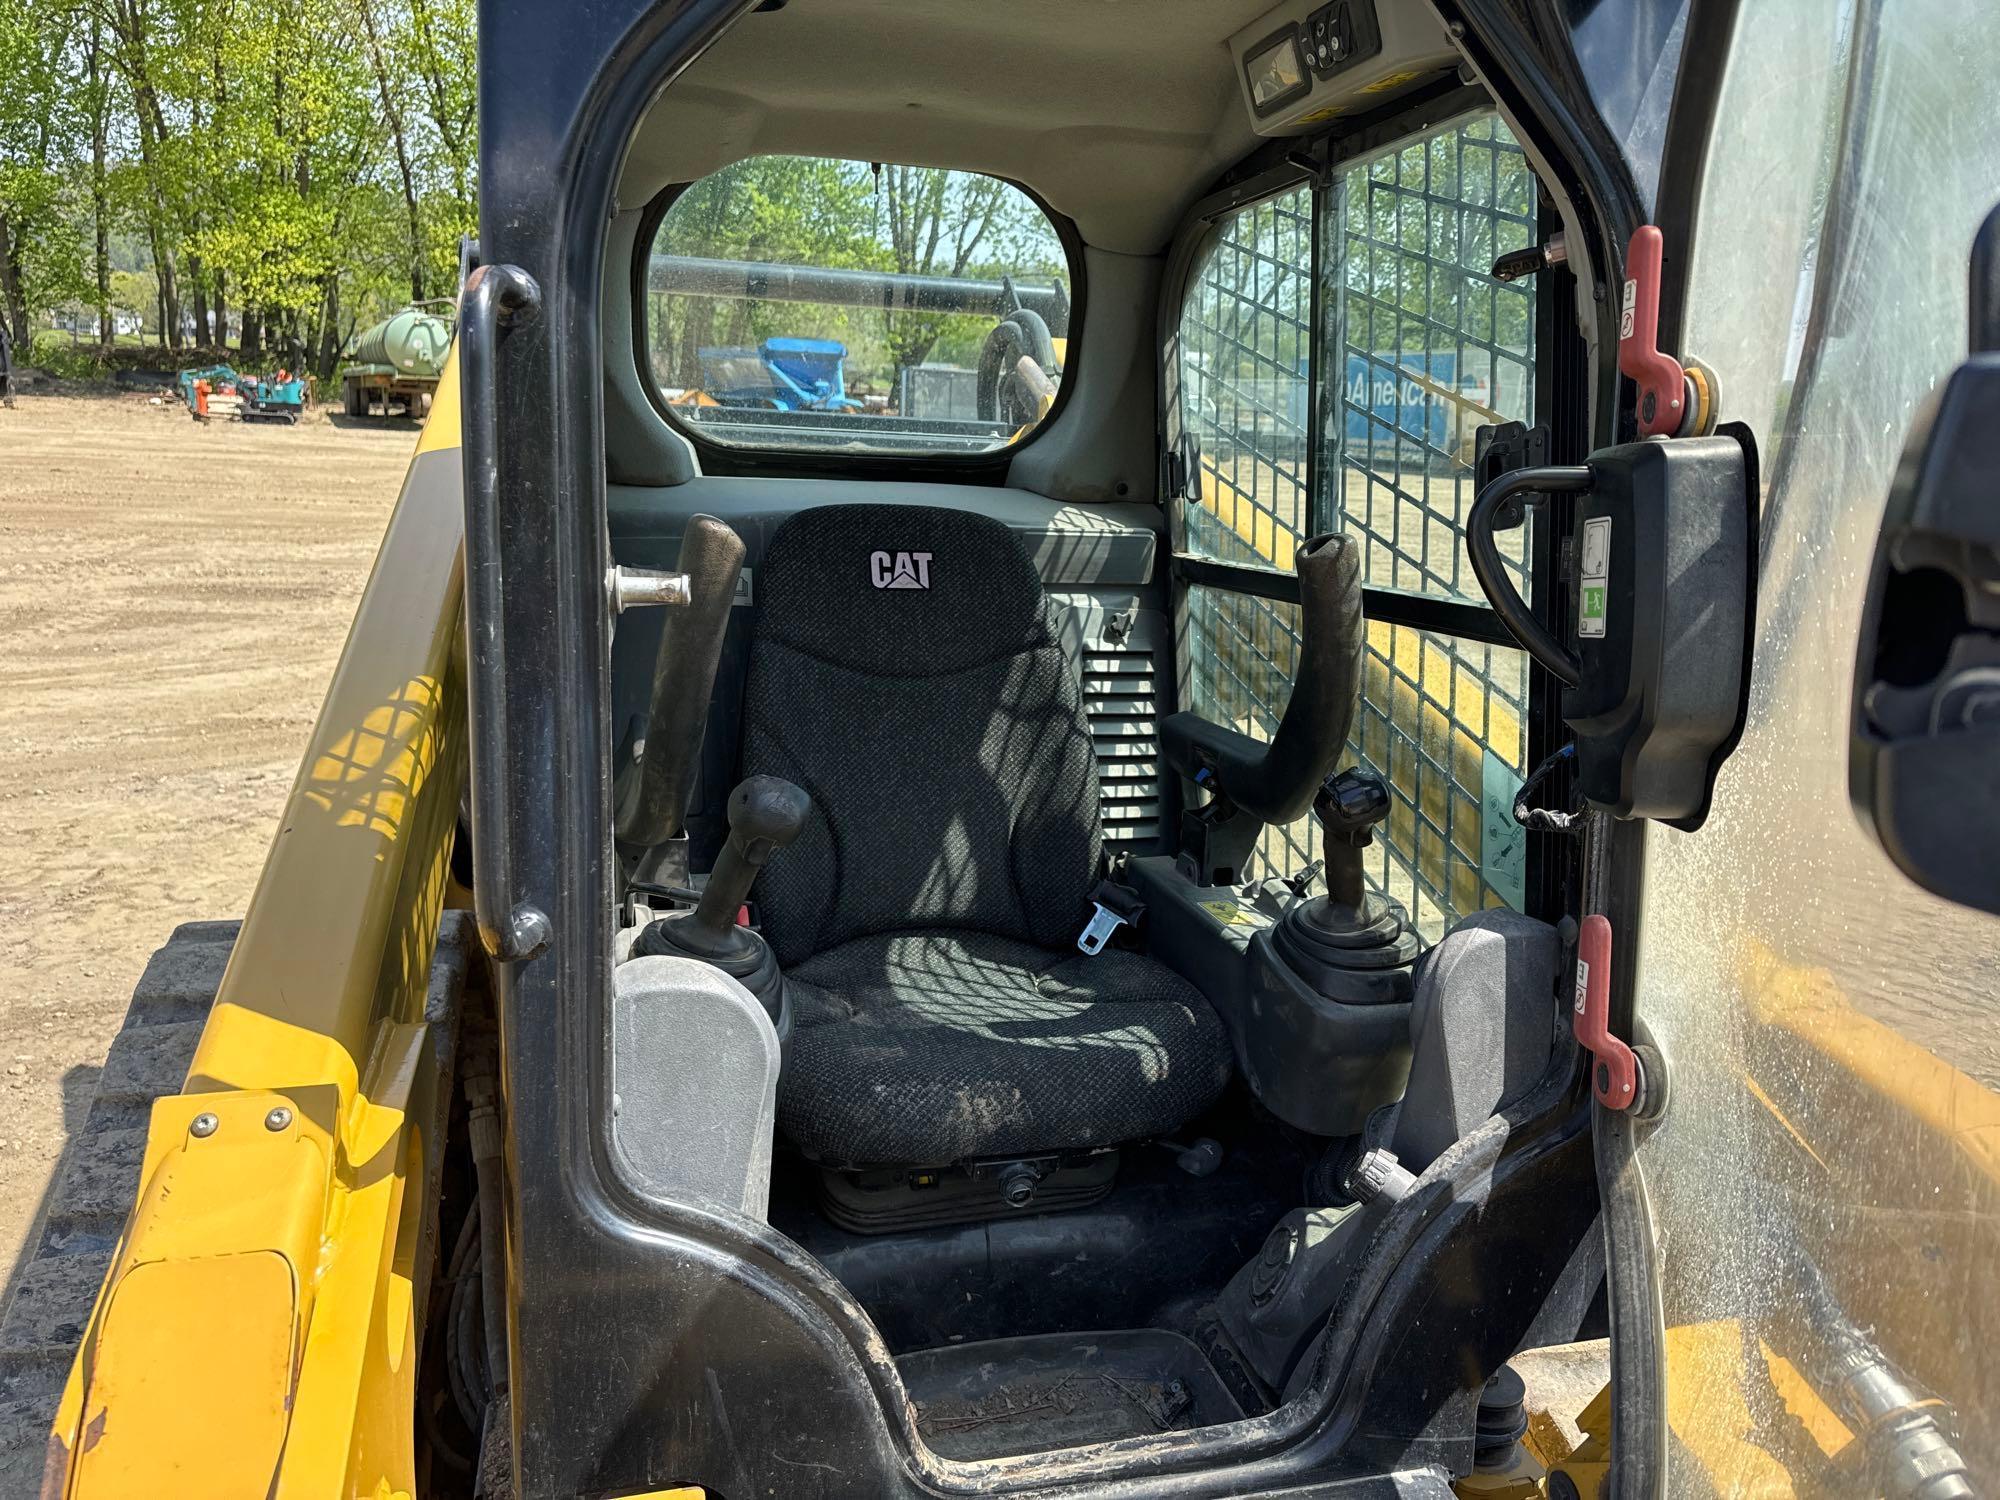 2014 CAT 299DXHP RUBBER TRACKED SKID STEER SN:JST00471 powered by Cat diesel engine, equipped with